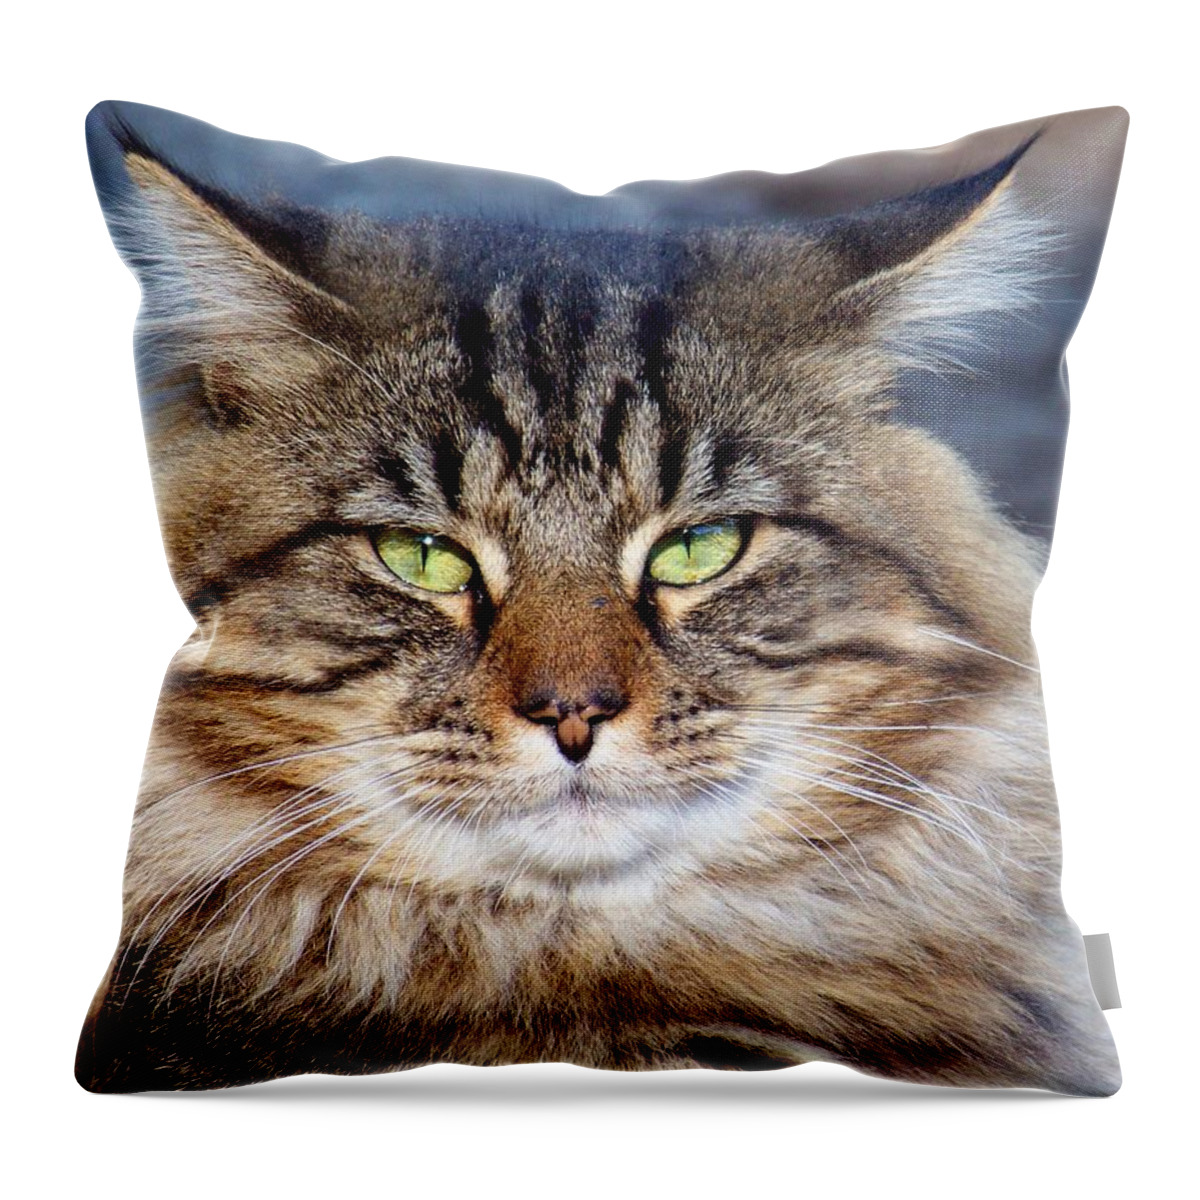 Cat Throw Pillow featuring the photograph Maine Coon I by Jai Johnson